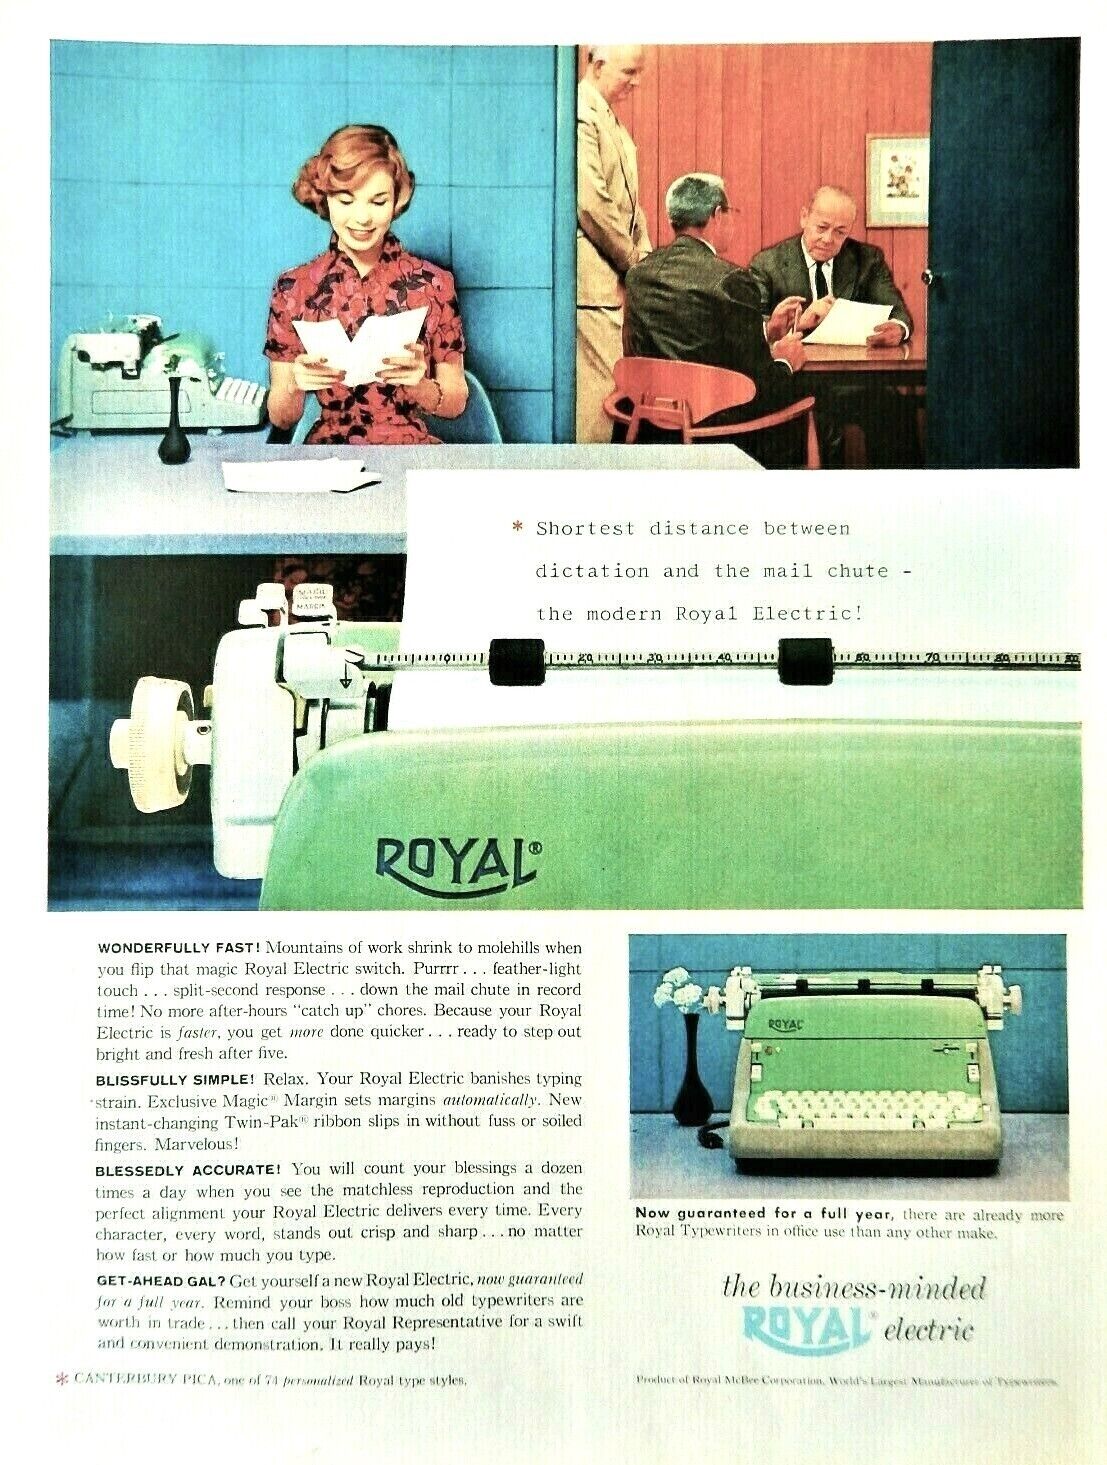 Royal vintage electric typewriter ad  1959 Canterburry Pica  advertisement 